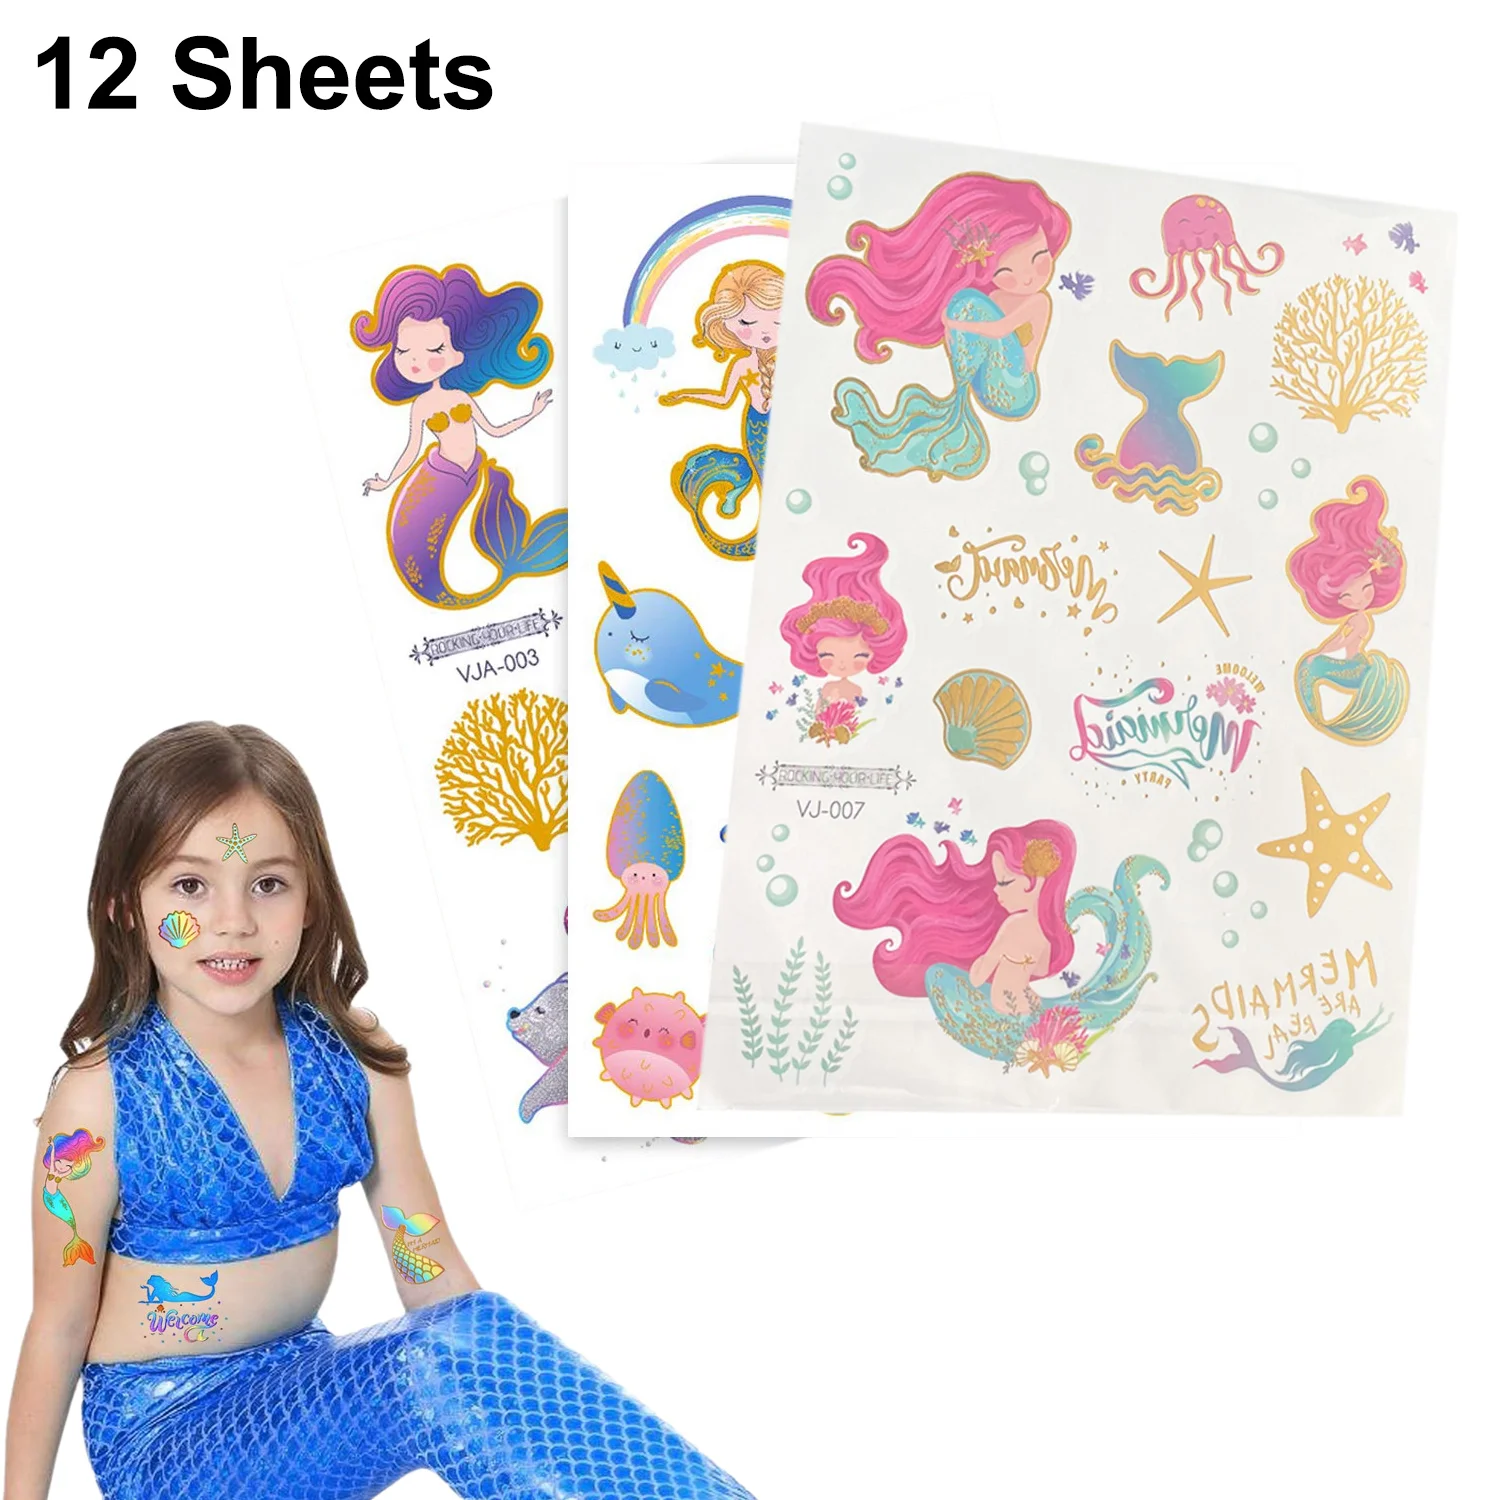 

12 Sheets Mermaid Birthday Favors Tattoos Mermaid Tail Temporary Tattoo Stickers for Girls Birthday Decorations Supplies Gifts